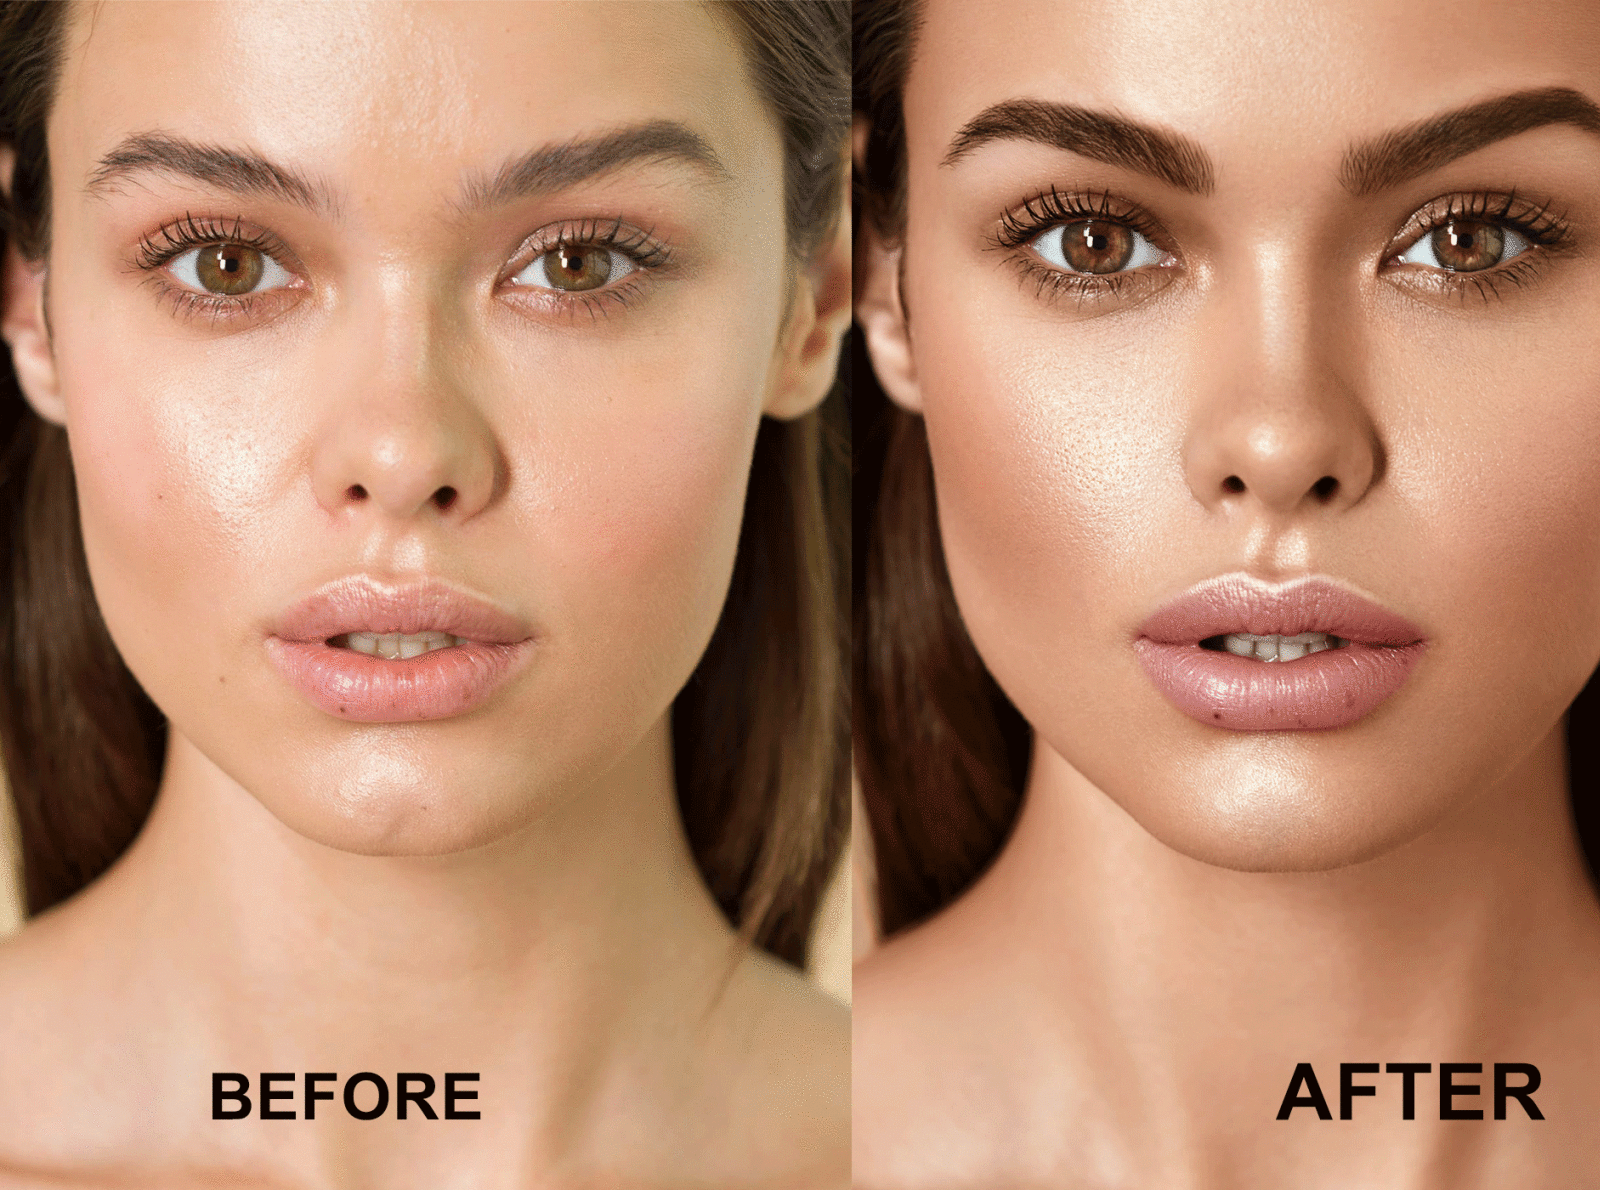 Retouching services professionally